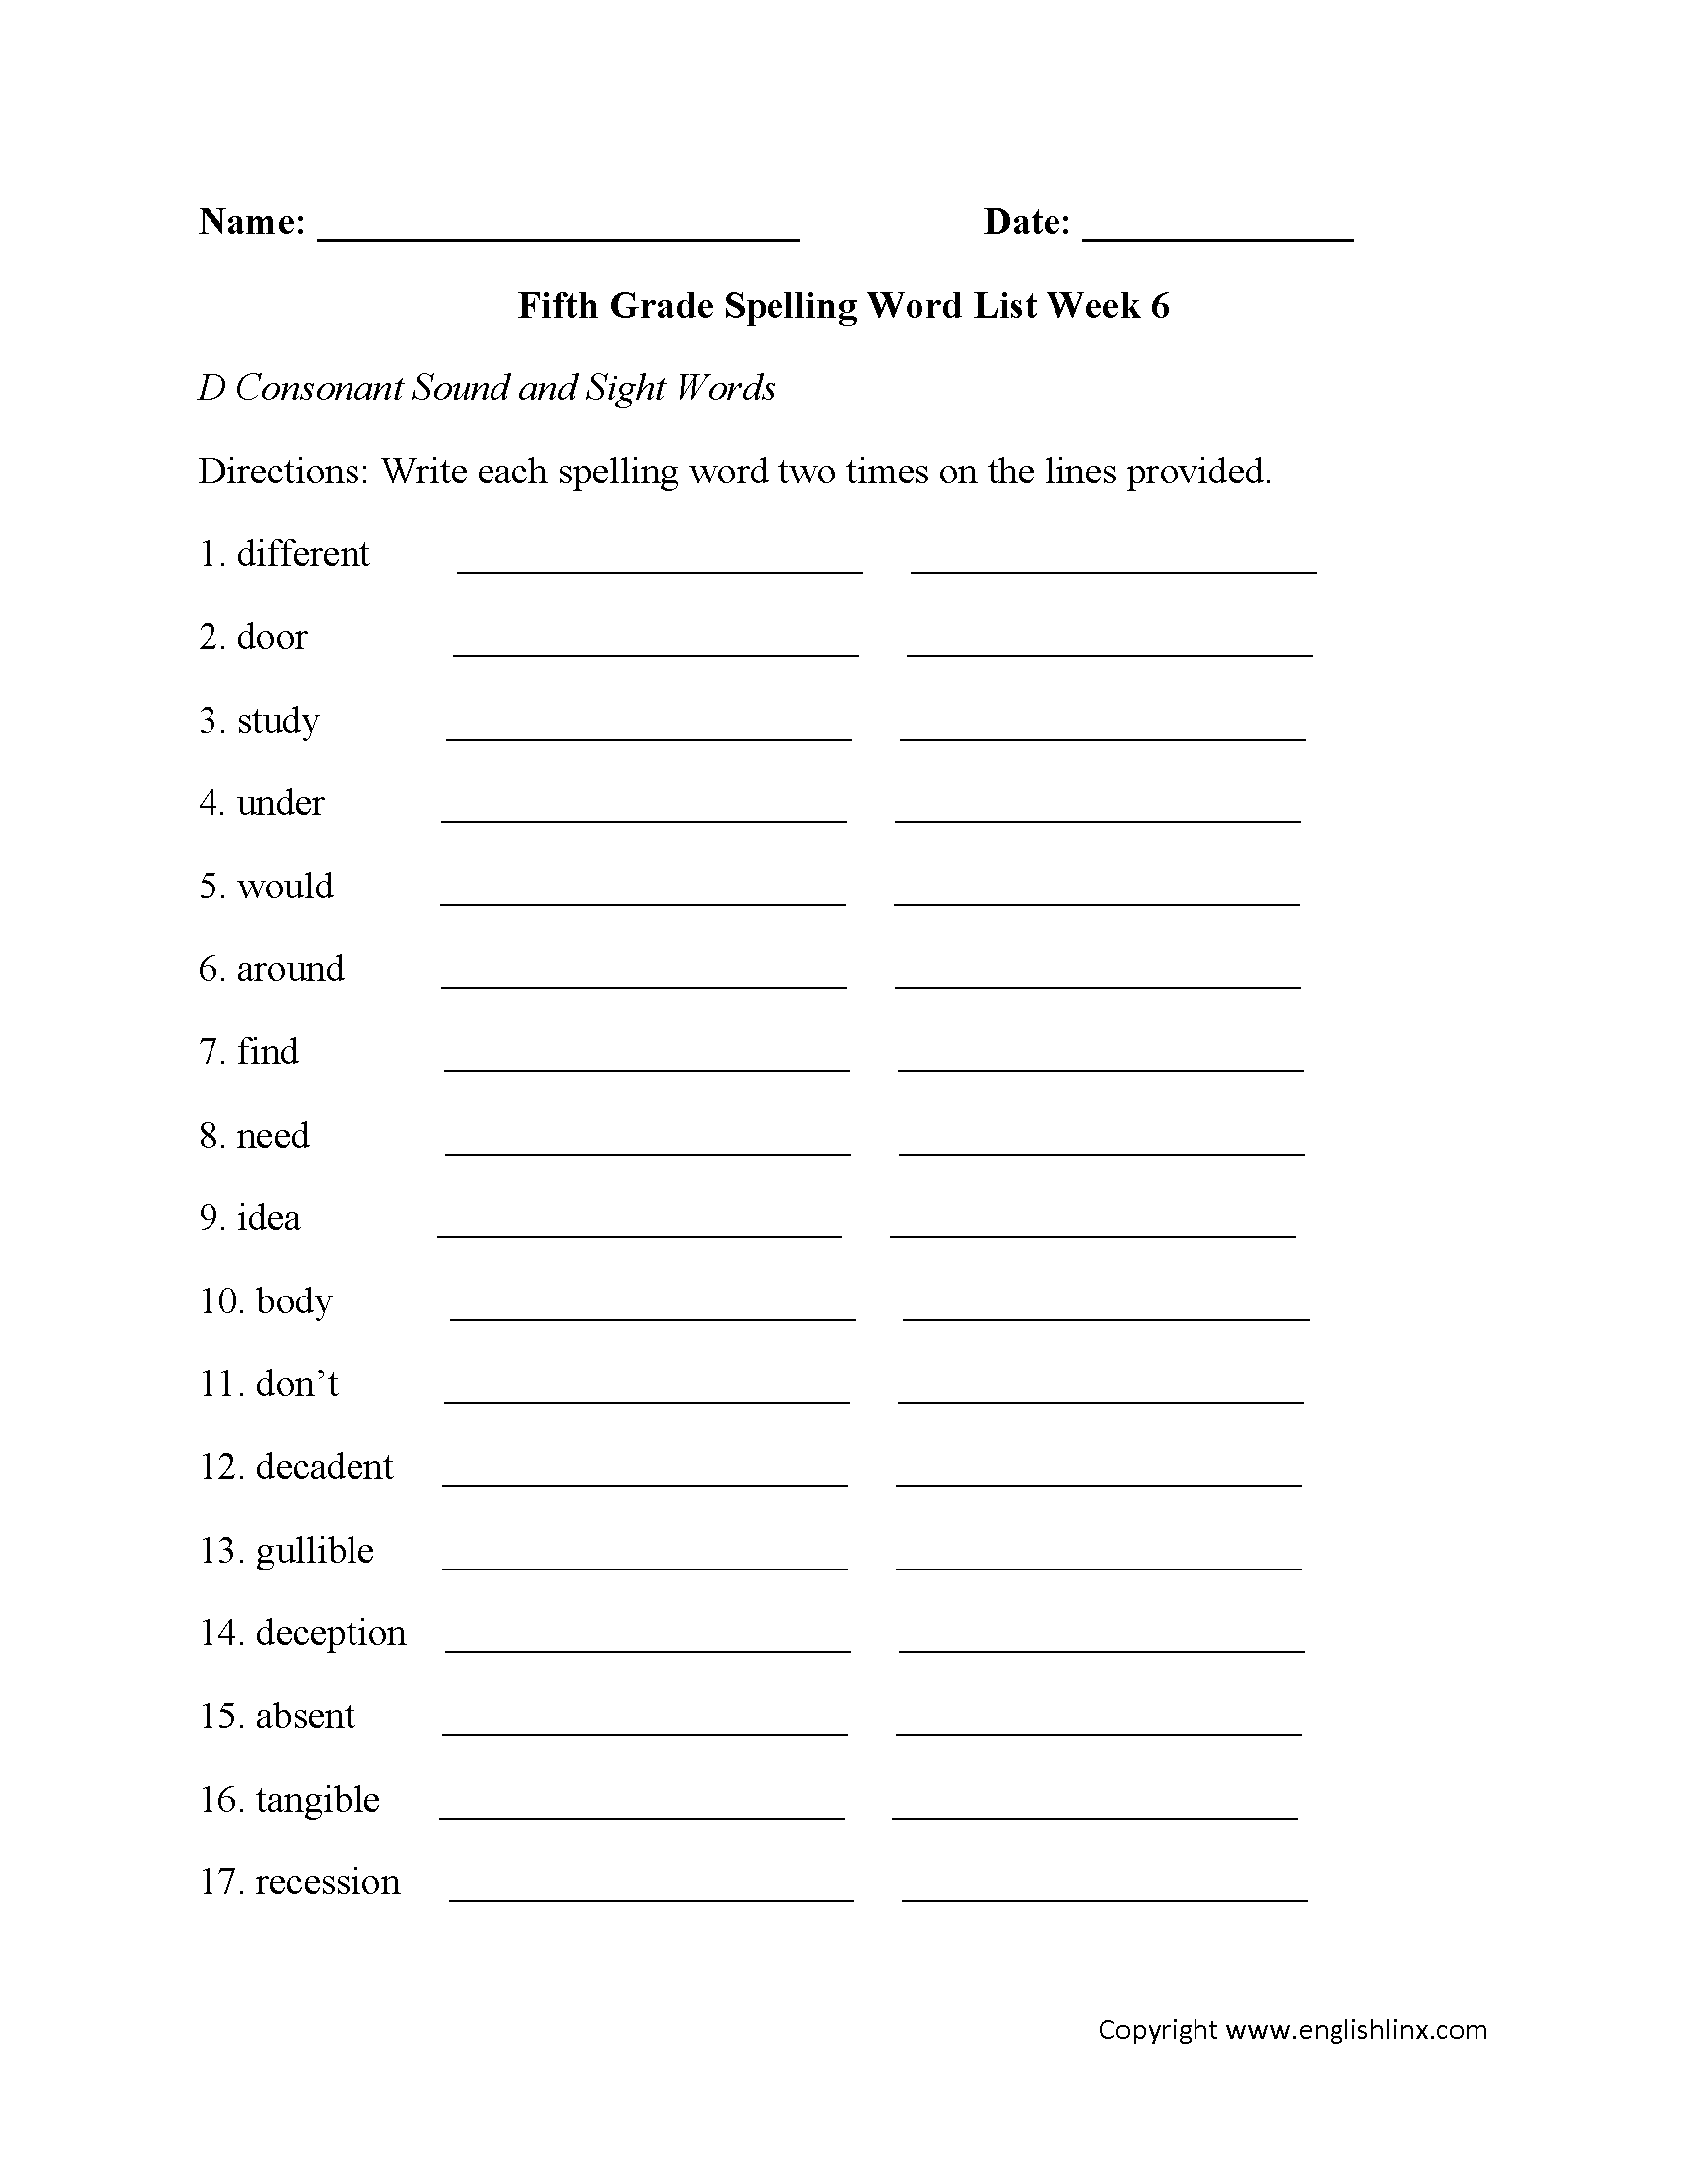 Week 6 D Consonant and Sight Words Fifth Grade Spelling Words Worksheets